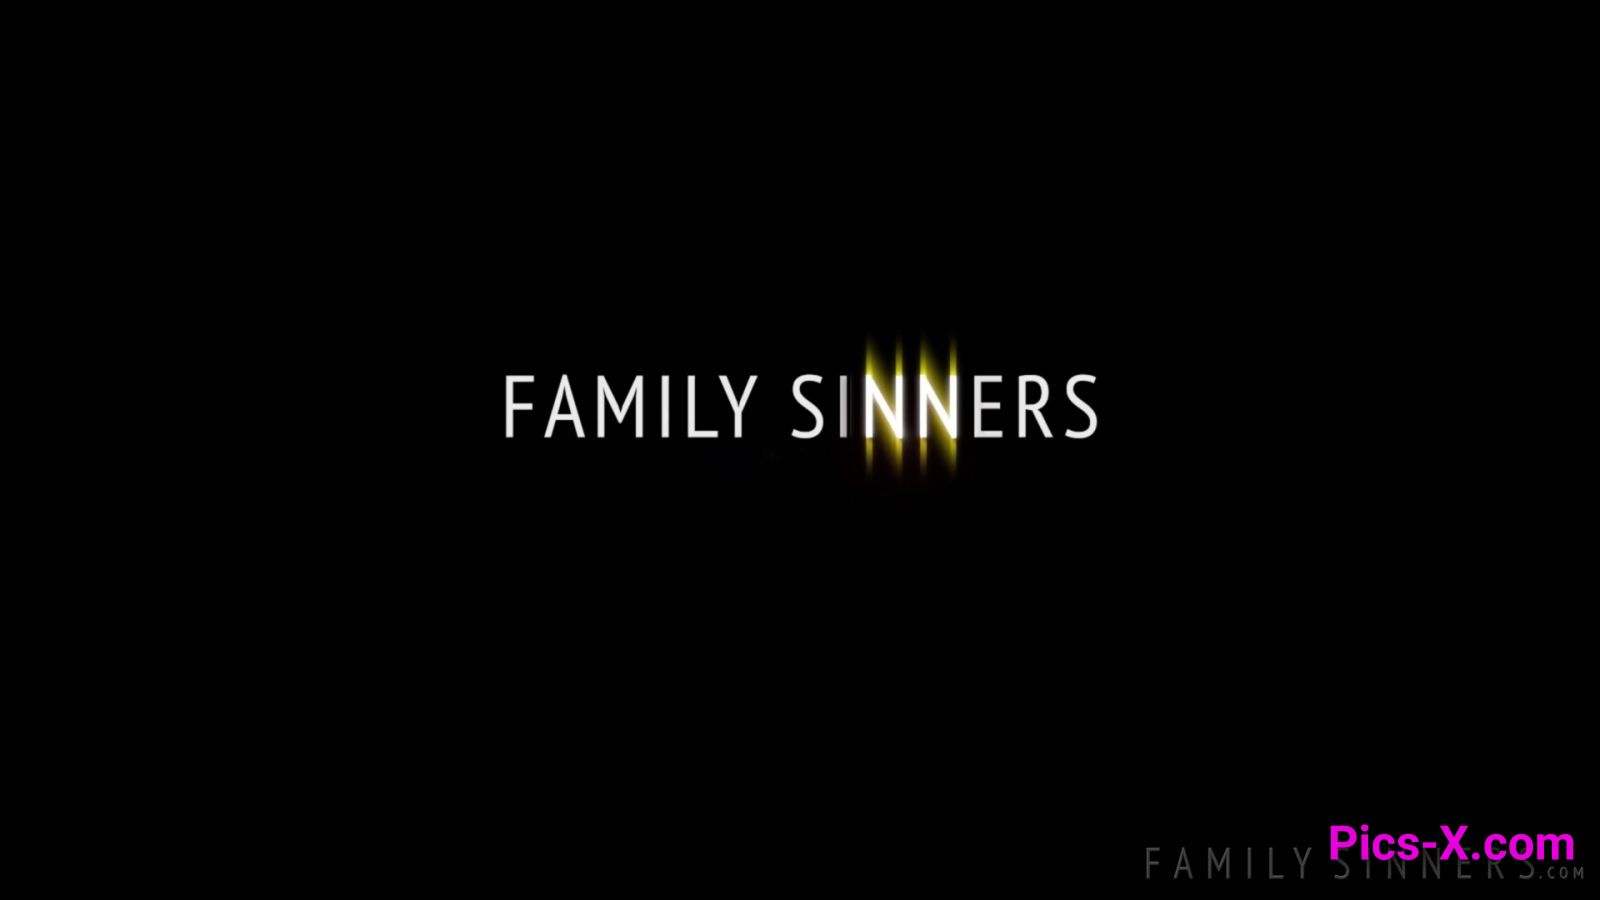 Mixed Family Vol. 5 Episode 4 - Family Sinners - Image 1